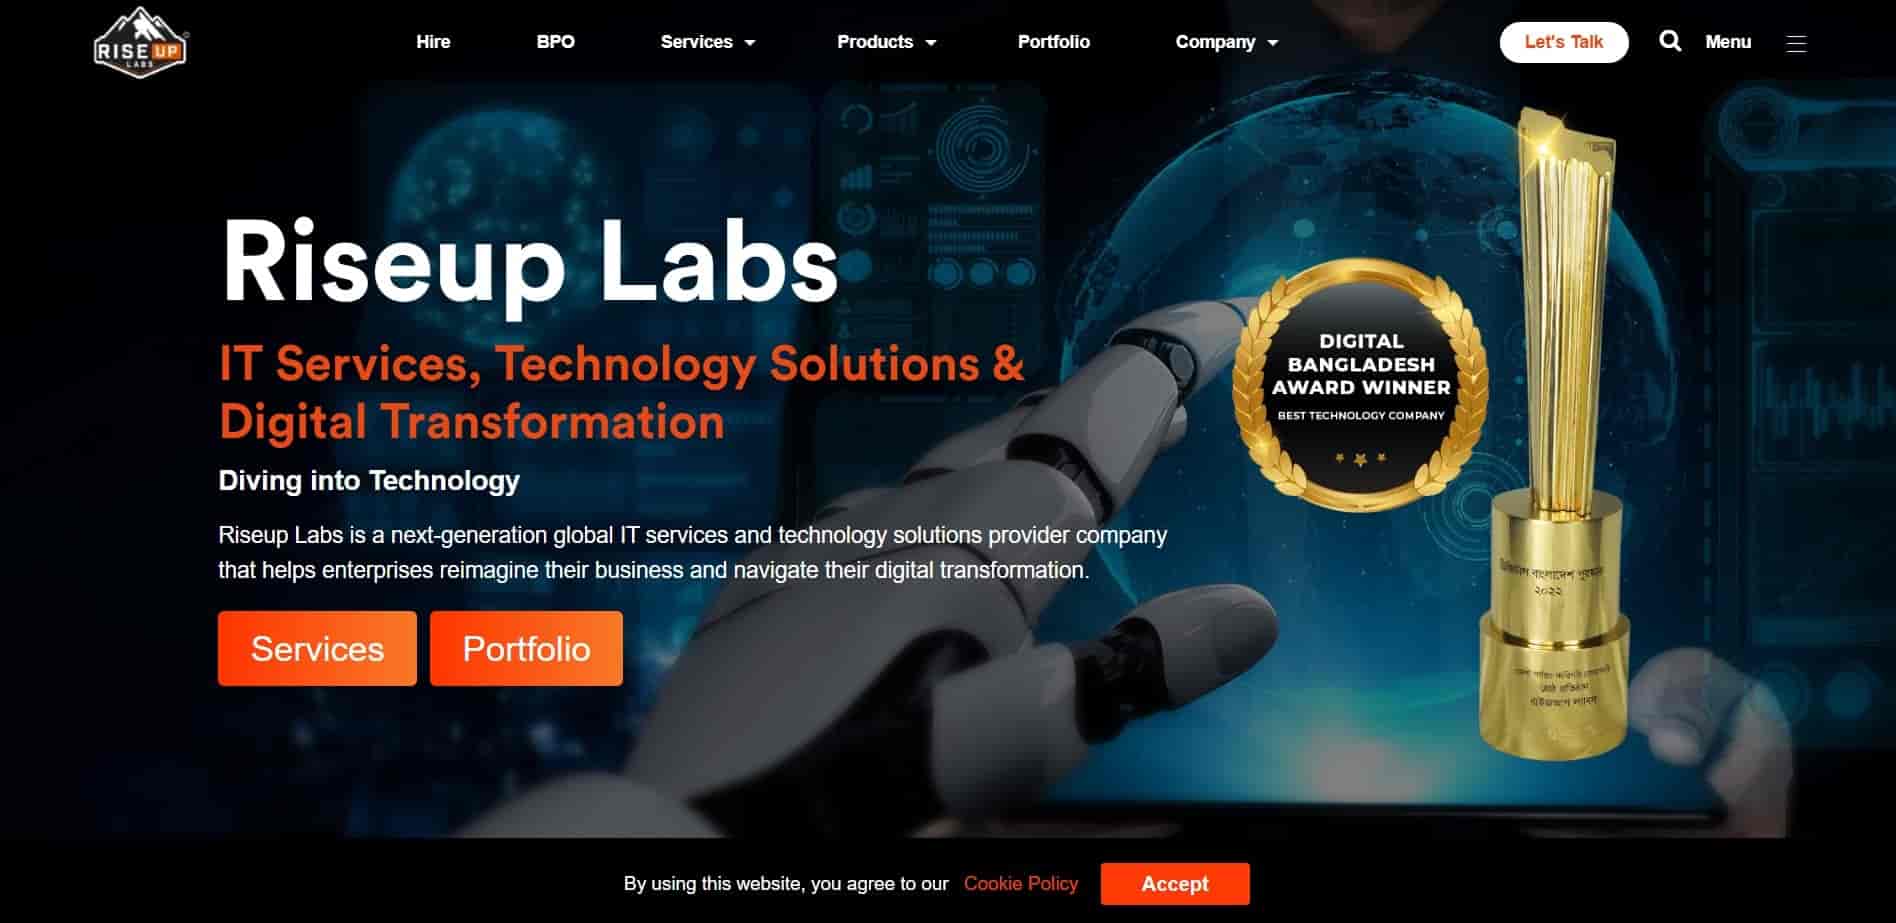 RiseUp Labs, their services and portfolio as a leading software company from Bangladesh.